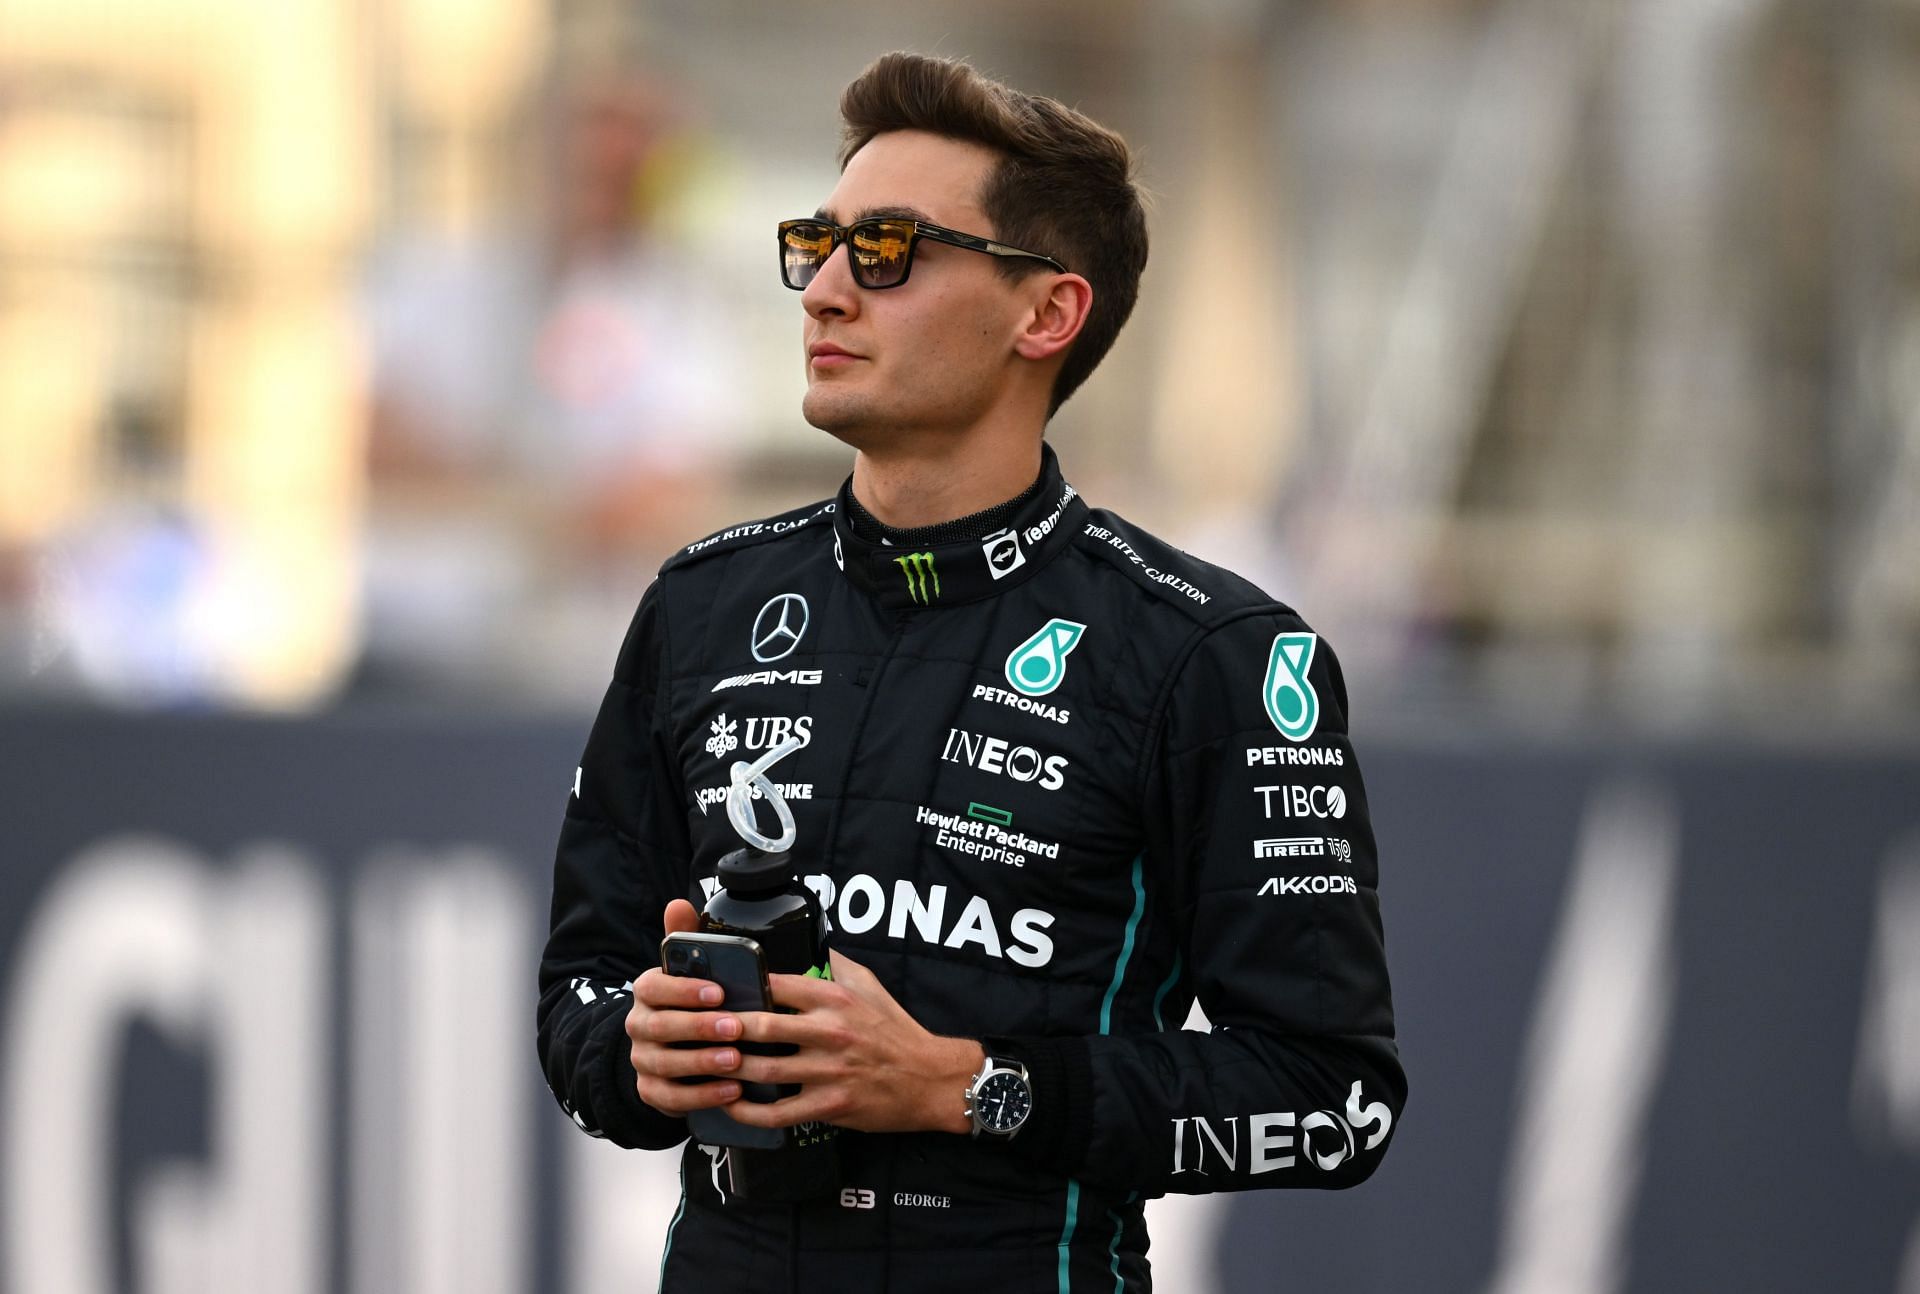 George Russell was able to secure fourth position for Mercedes in Bahrain